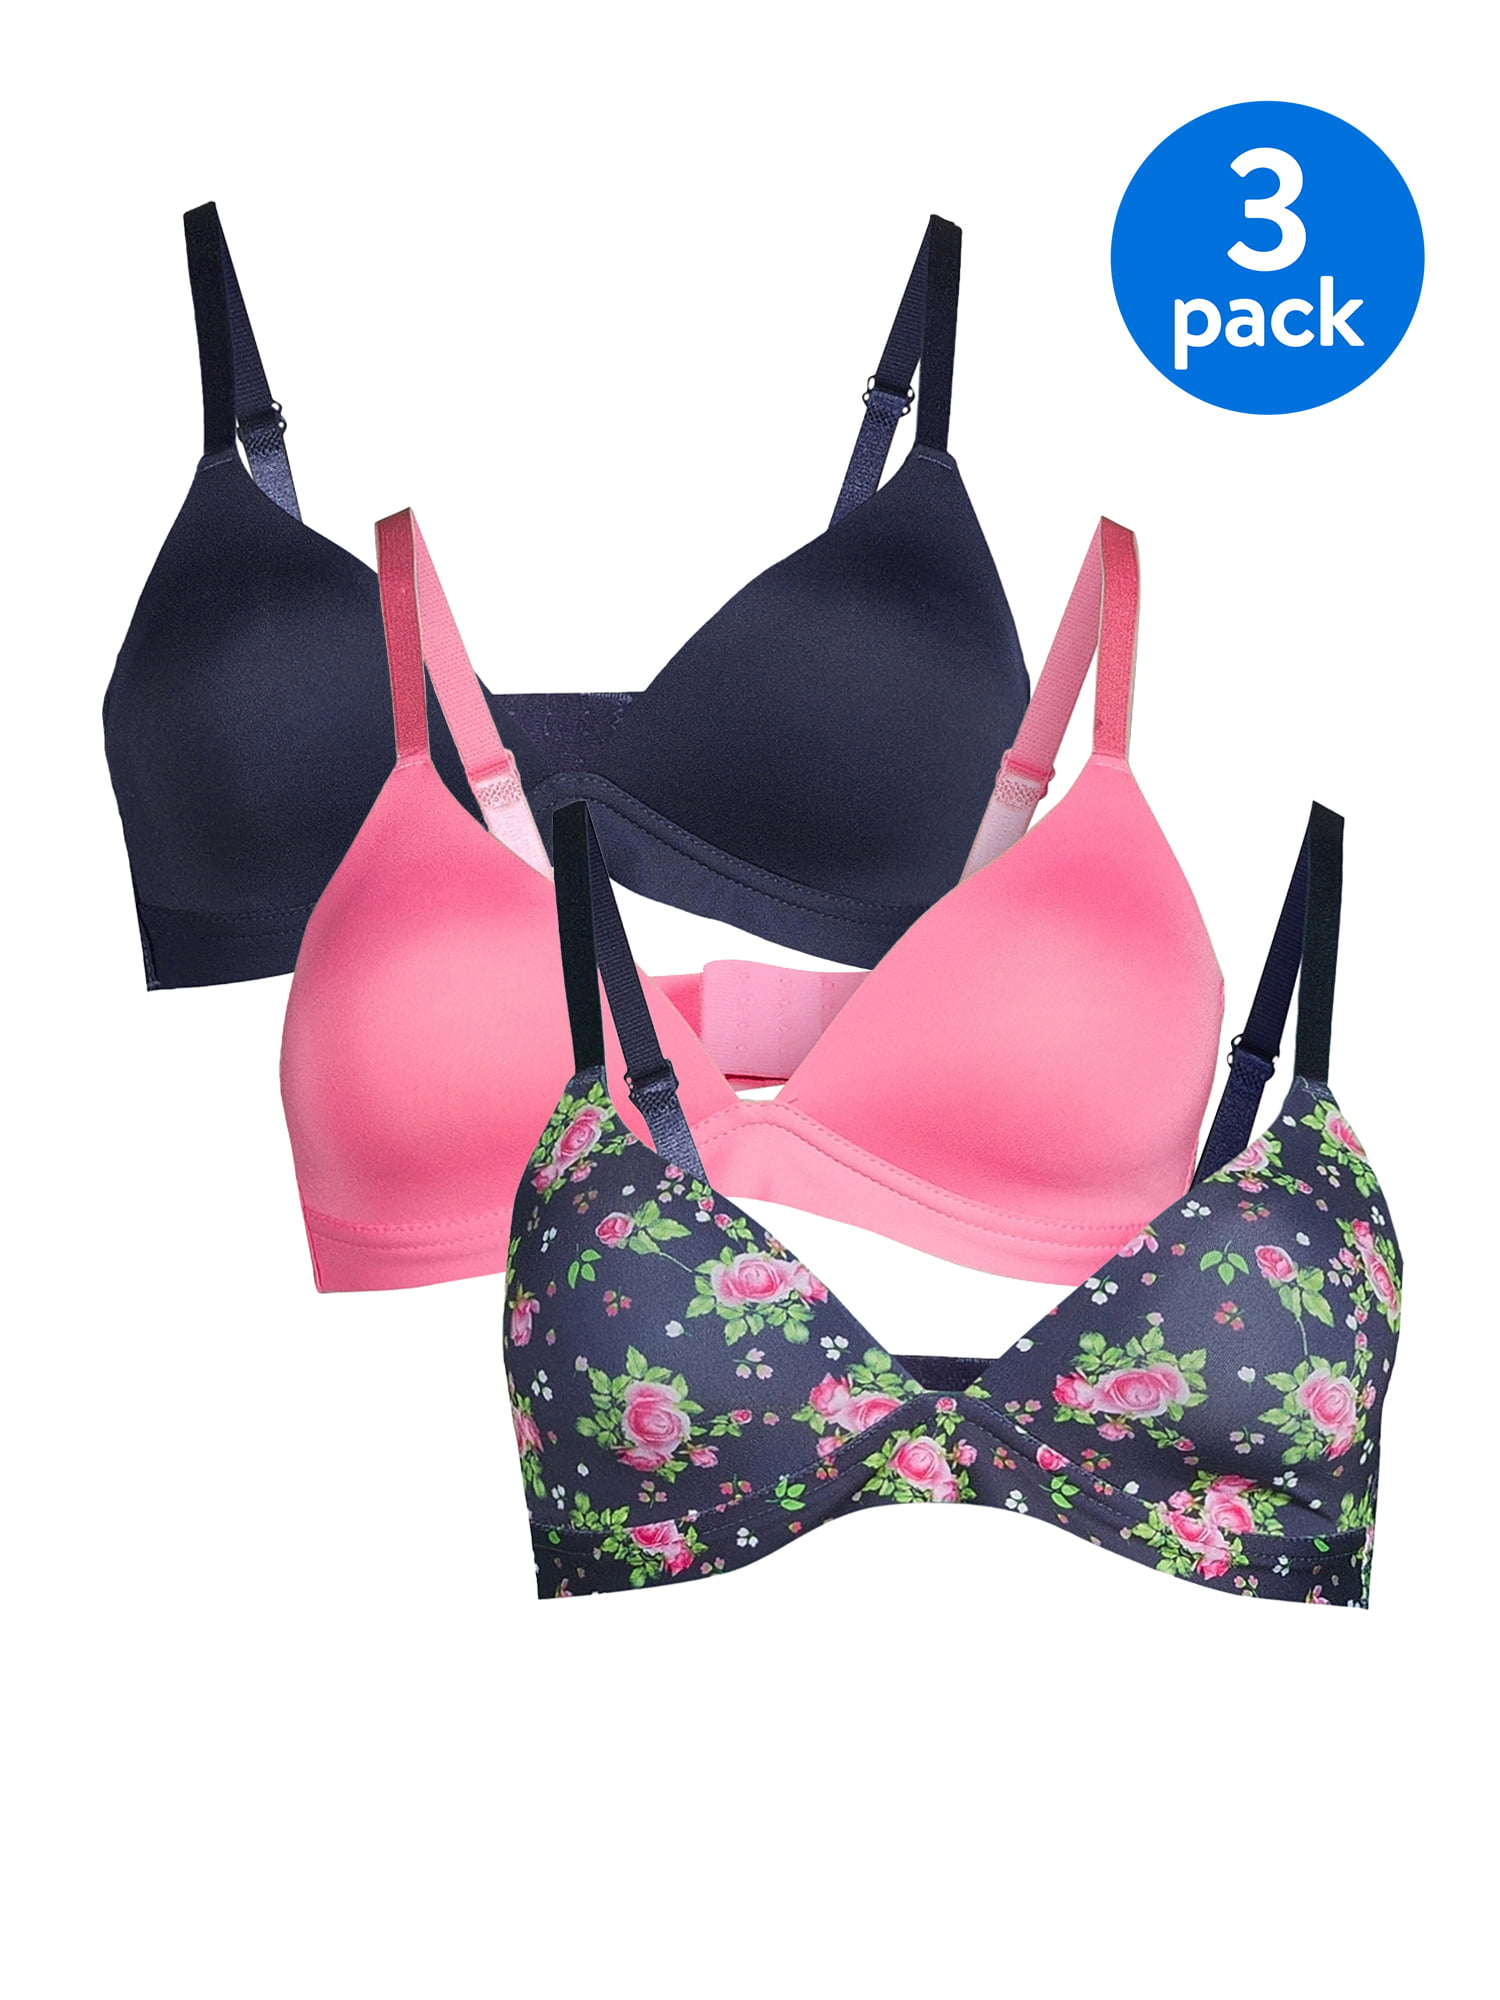 YMI Women's Multi-Color and Solid Push-Up Bras, 3-Pack